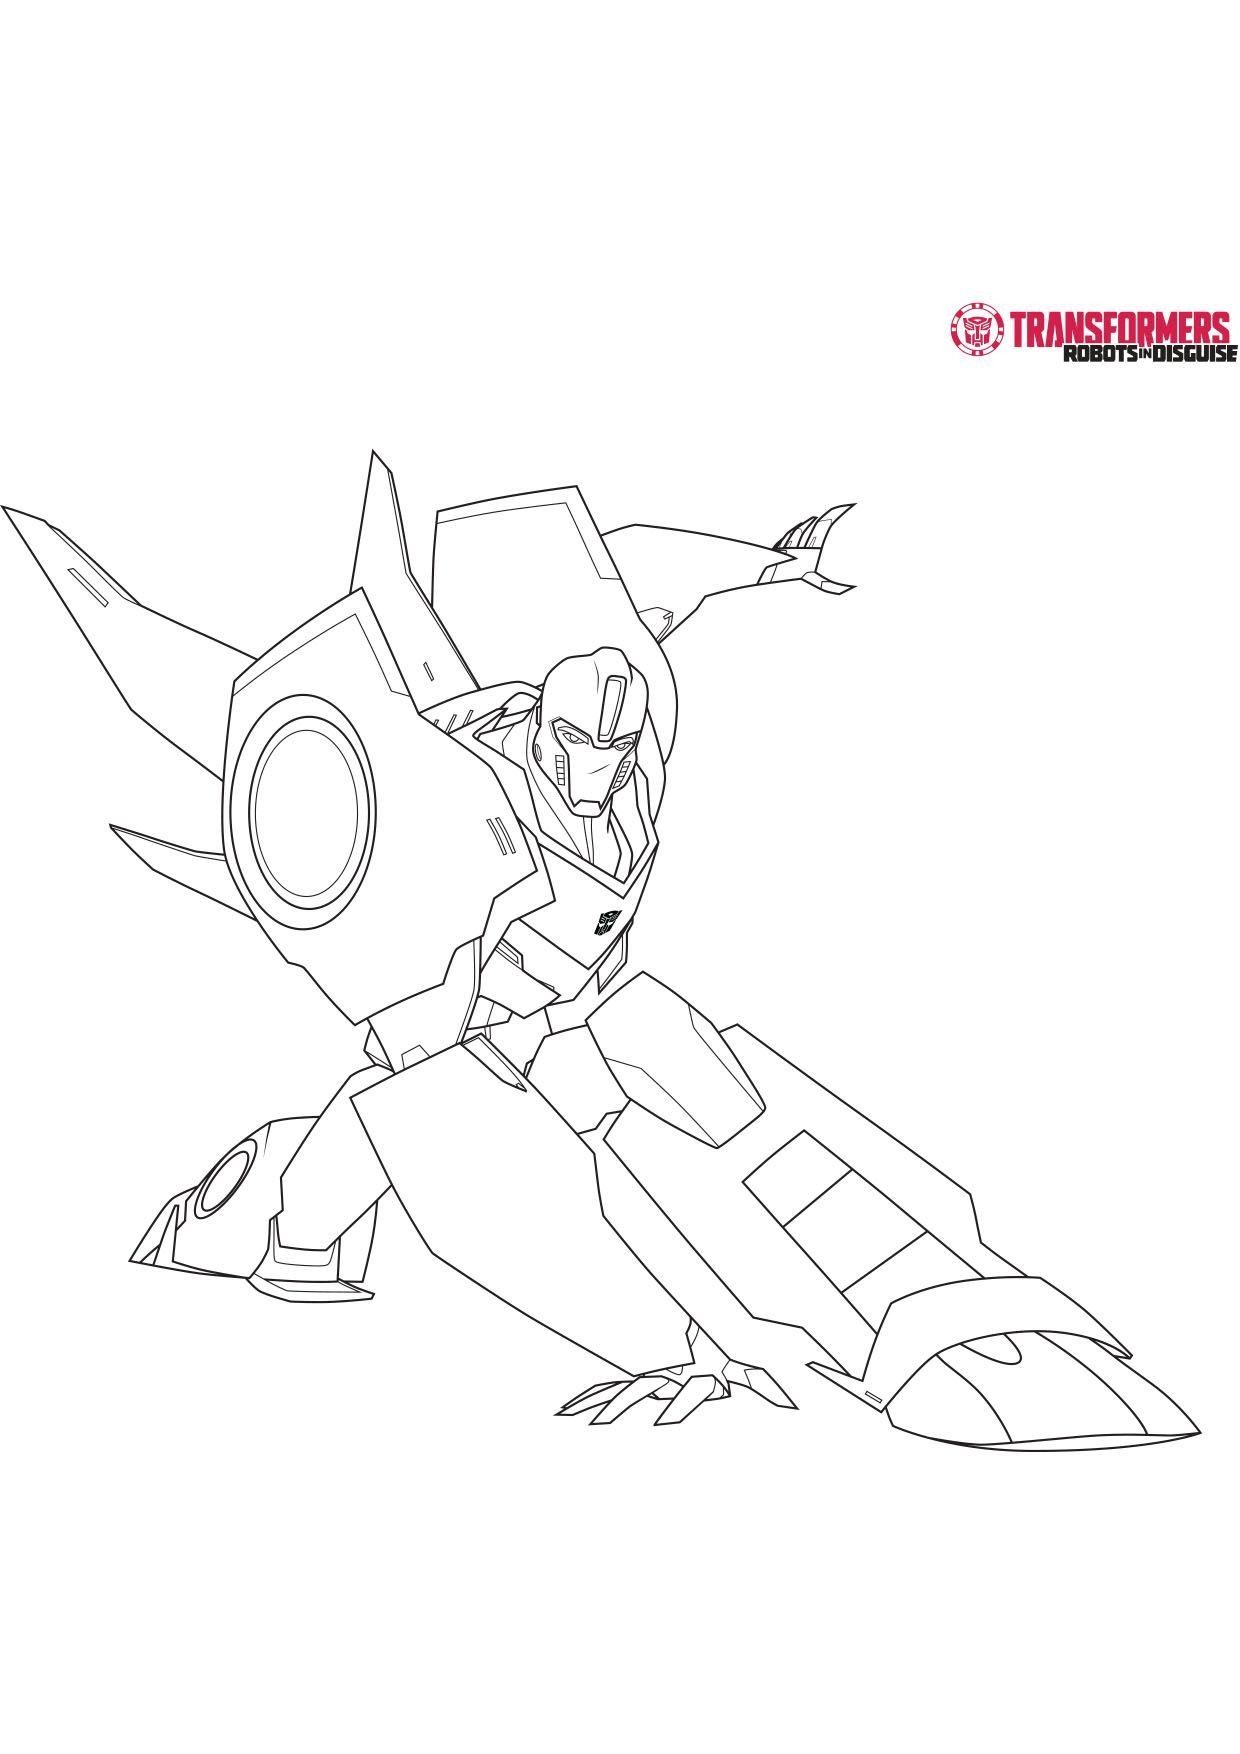 Bumblebee 5 - Coloriages Dessins Animes - Transformers Robots In Disguise à Coloriage Bumblebee